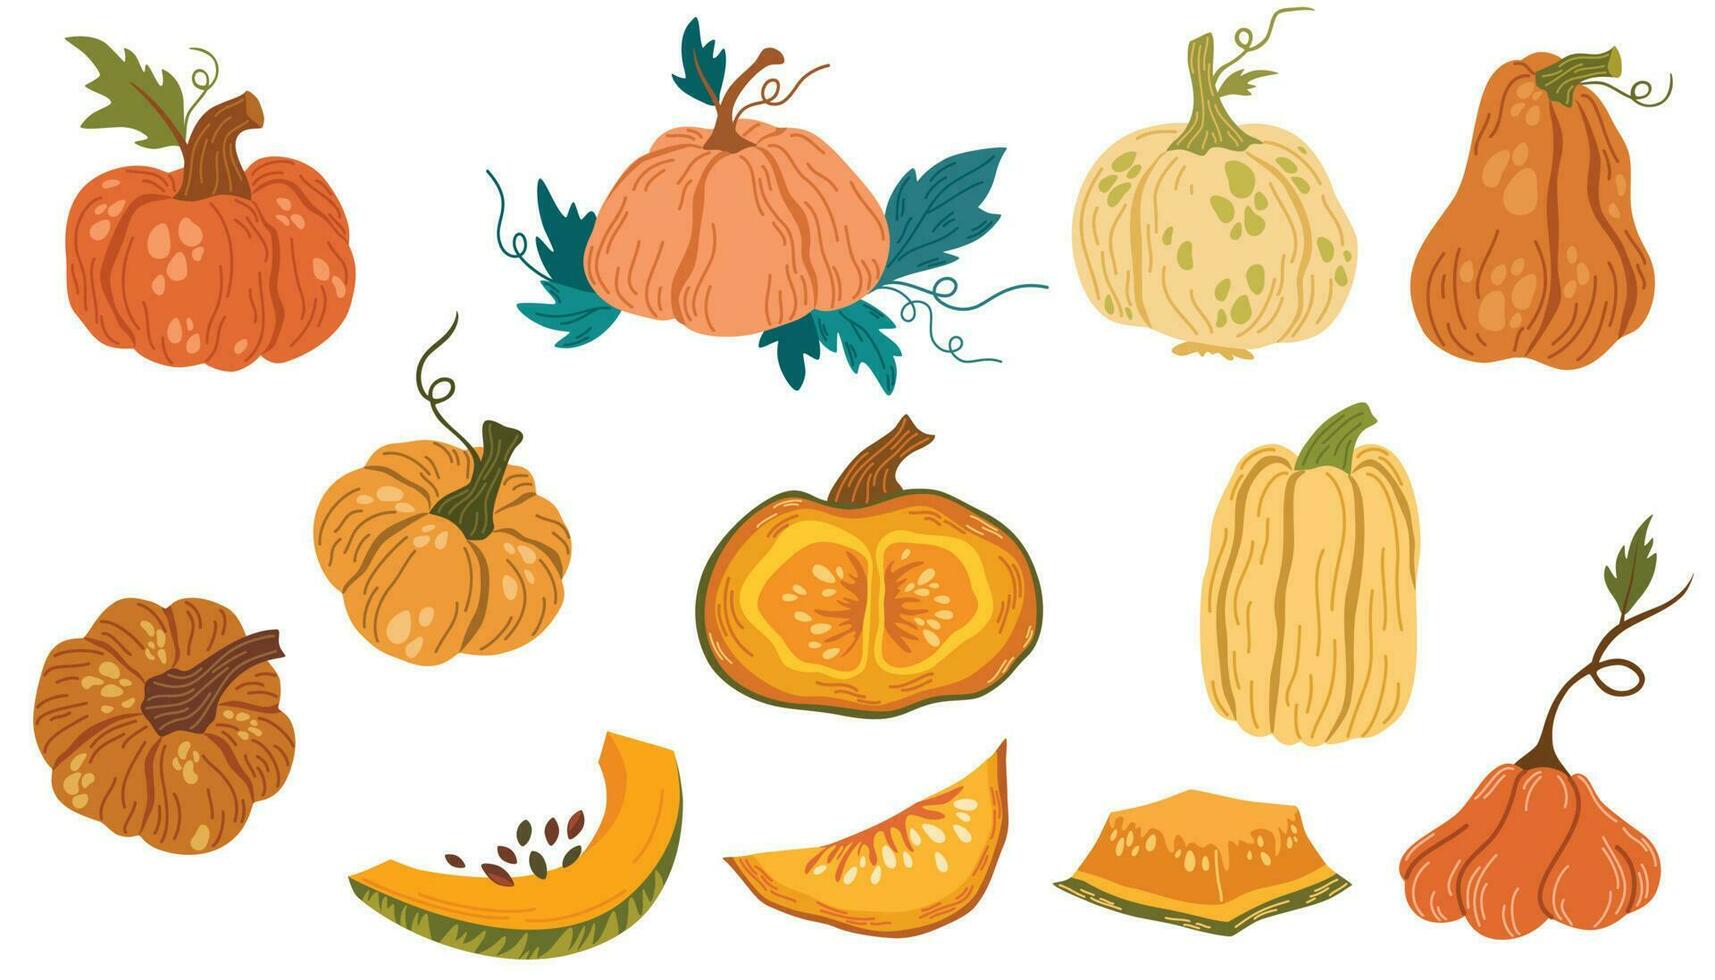 Pumpkins set. Elements of Thanksgiving and Halloween. Different pumpkins, fresh vegetables, autumn harvest. Cartoon vector illustration isolated on the white background.